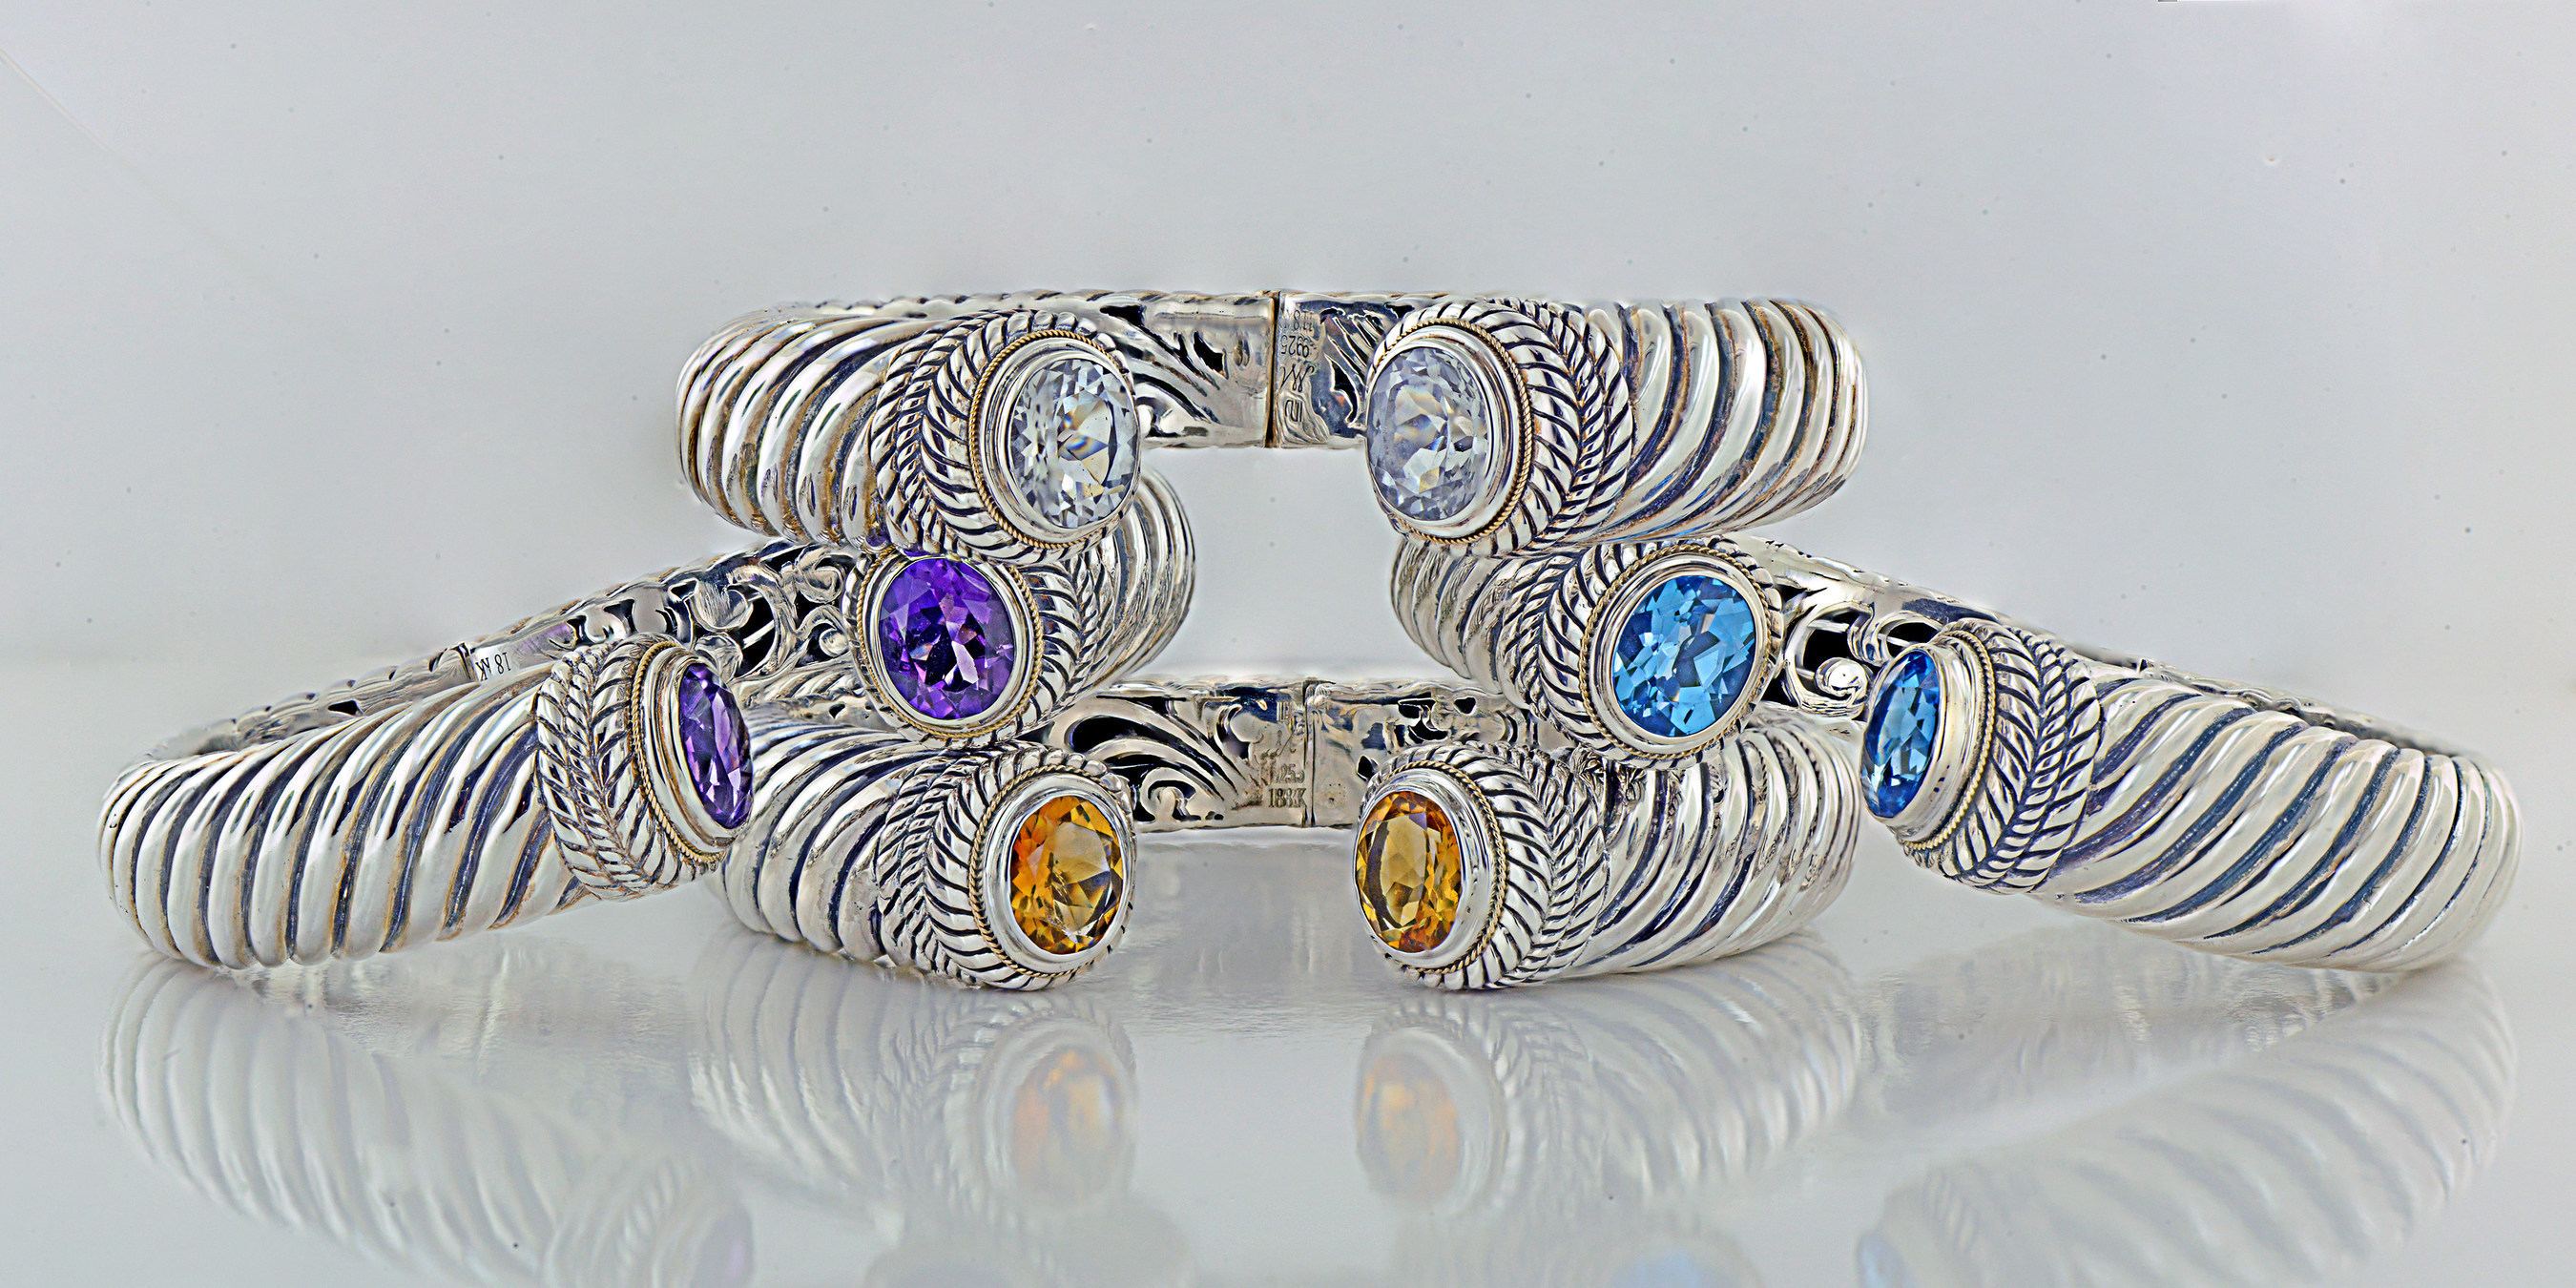 Perfect for Mother's Day. Handcrafted Sterling Silver and Gemstone bangles by Robert Manse Designs. Amethyst and Citrine bangles boast over 5 carats of gemstones. Blue Topaz and White Topaz have over 8 carats of top quality gemstones.